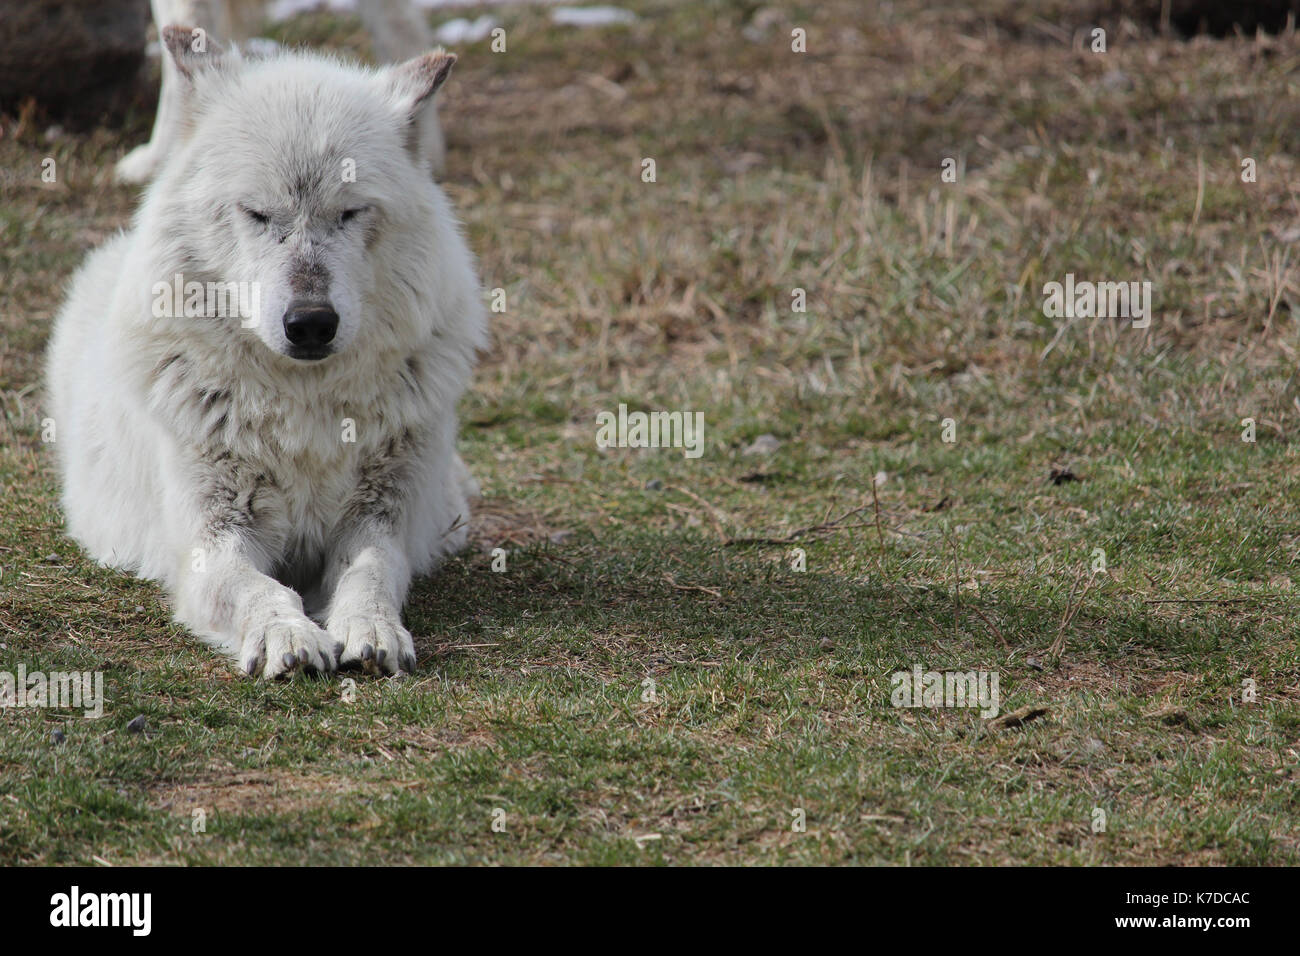 Arctic wolf relaxing on field Stock Photo